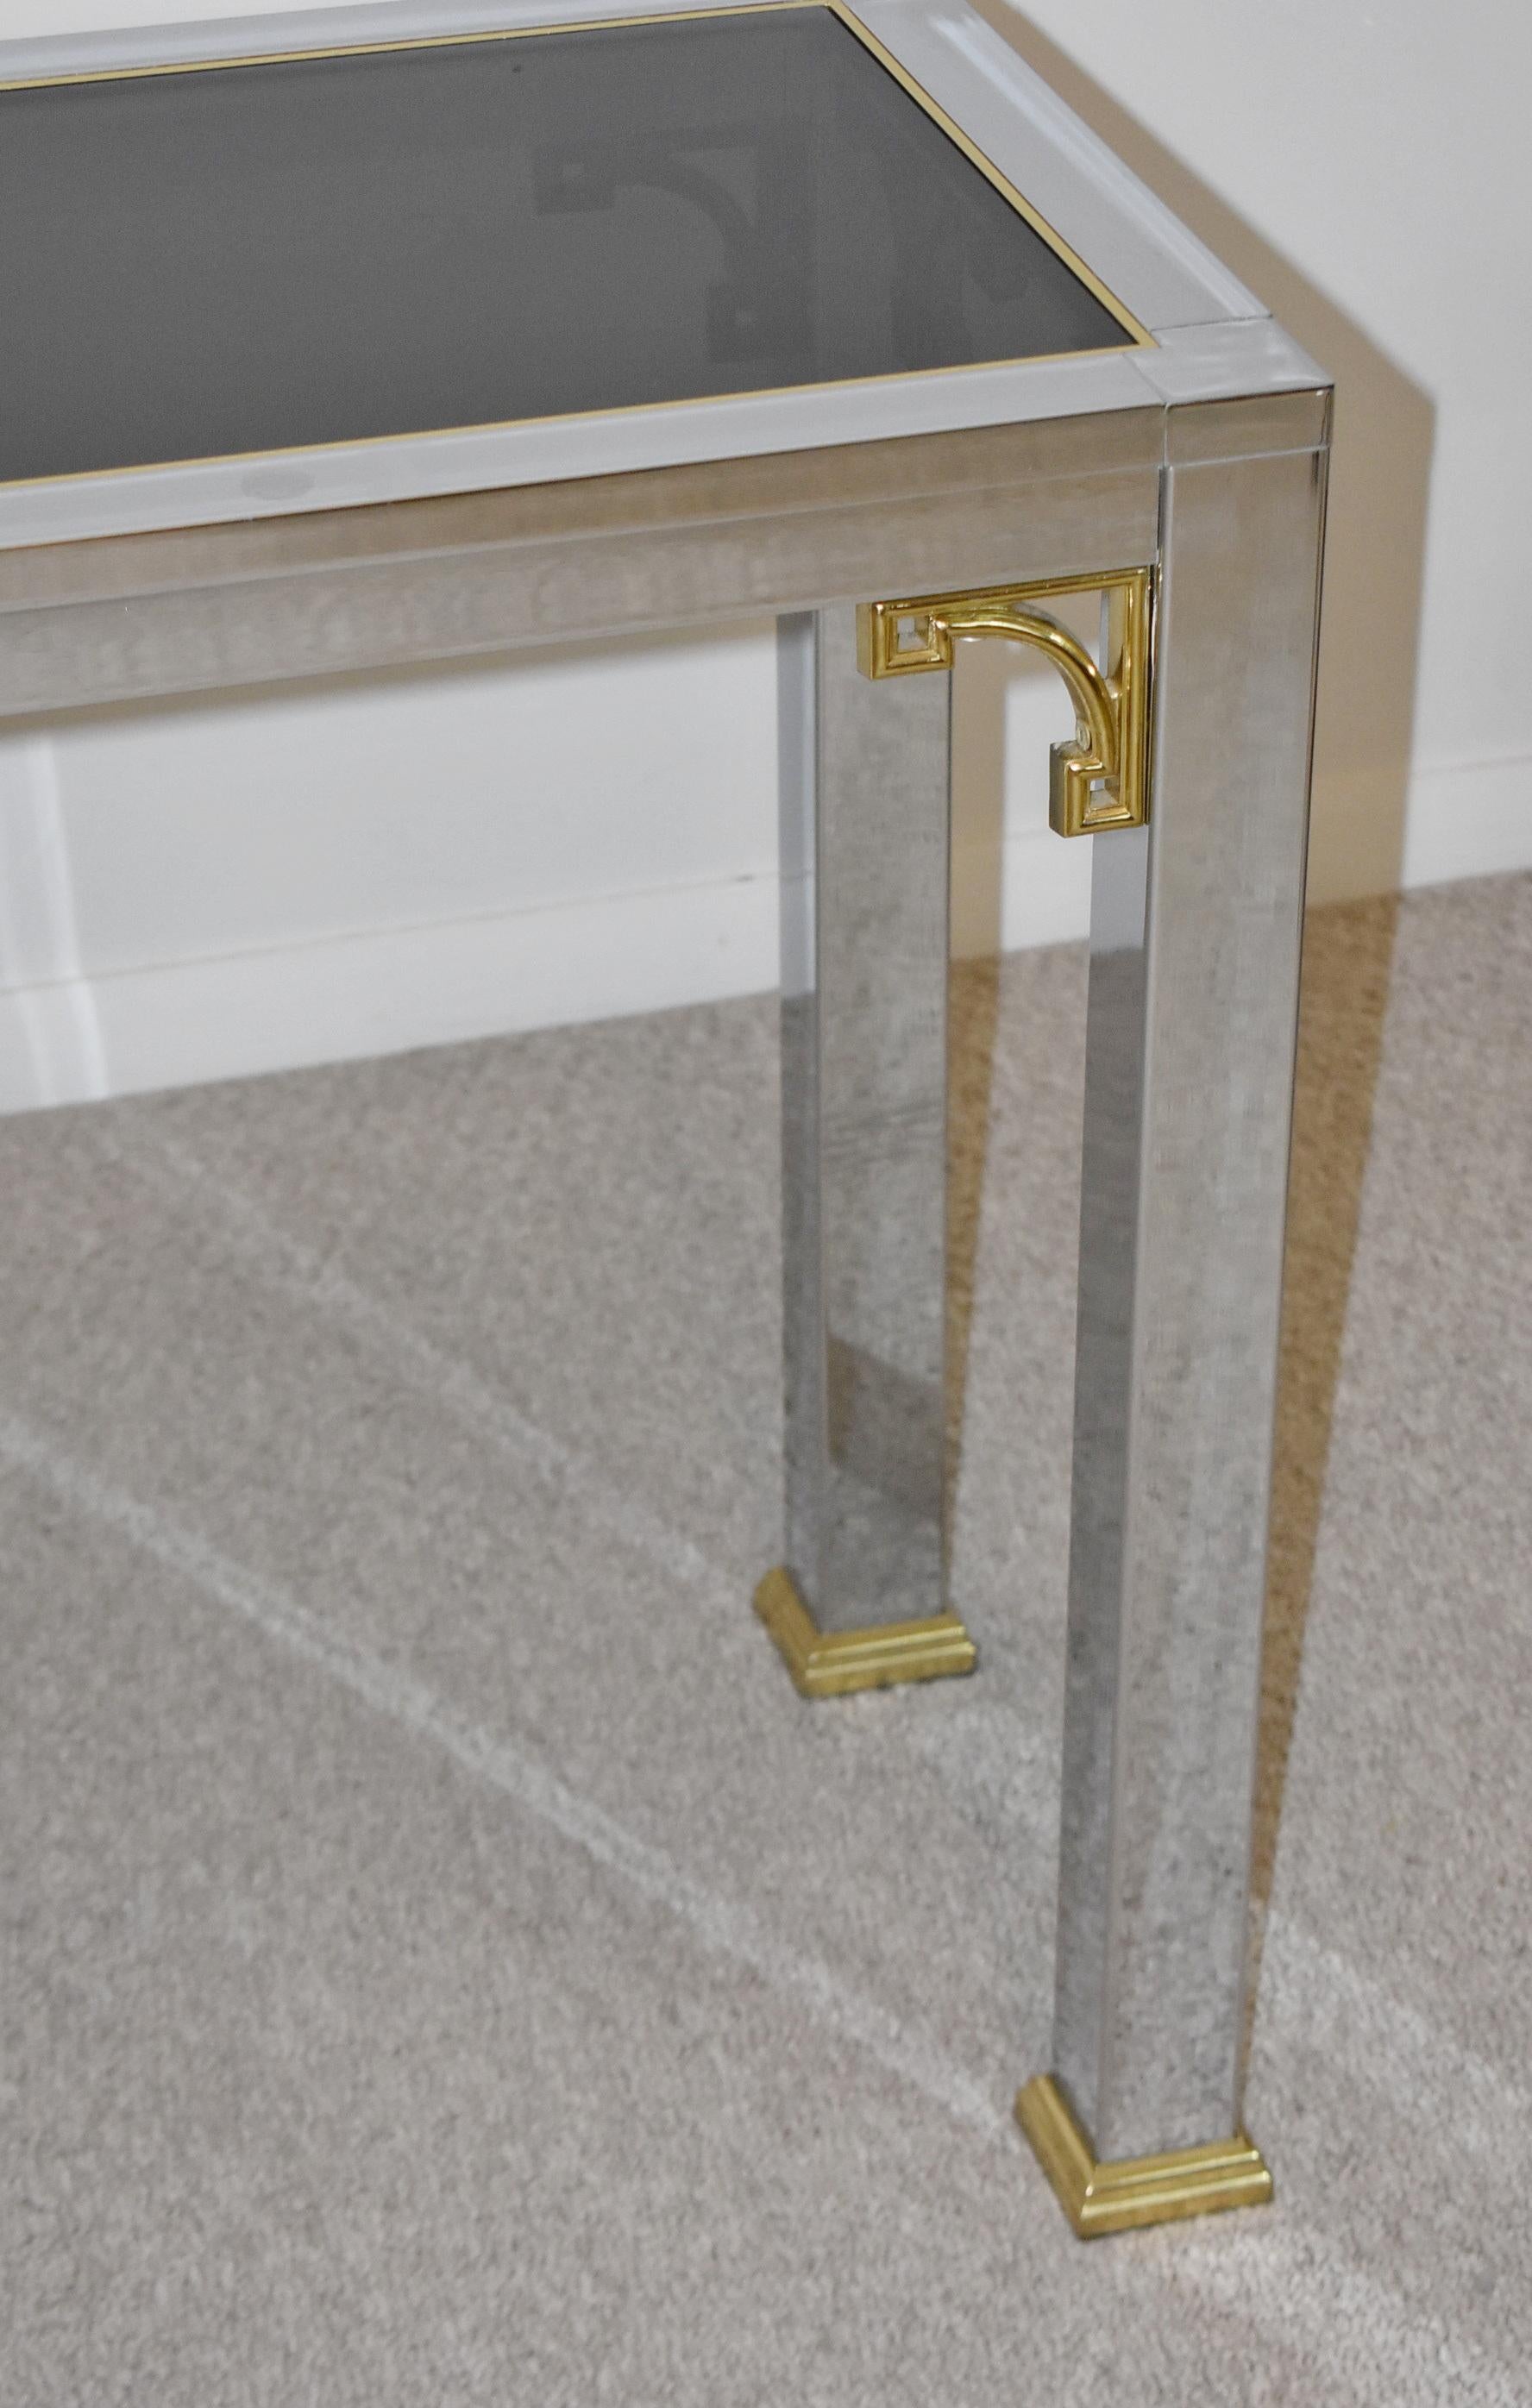 Mastercraft chrome console table. Circa 1970s. Square tubular legs with brass feet. 3 Smoked glass top panels. Brass corner braces. Mid-Century Modern Style. Great condition, wear consistent with age and use. Dimensions: 60